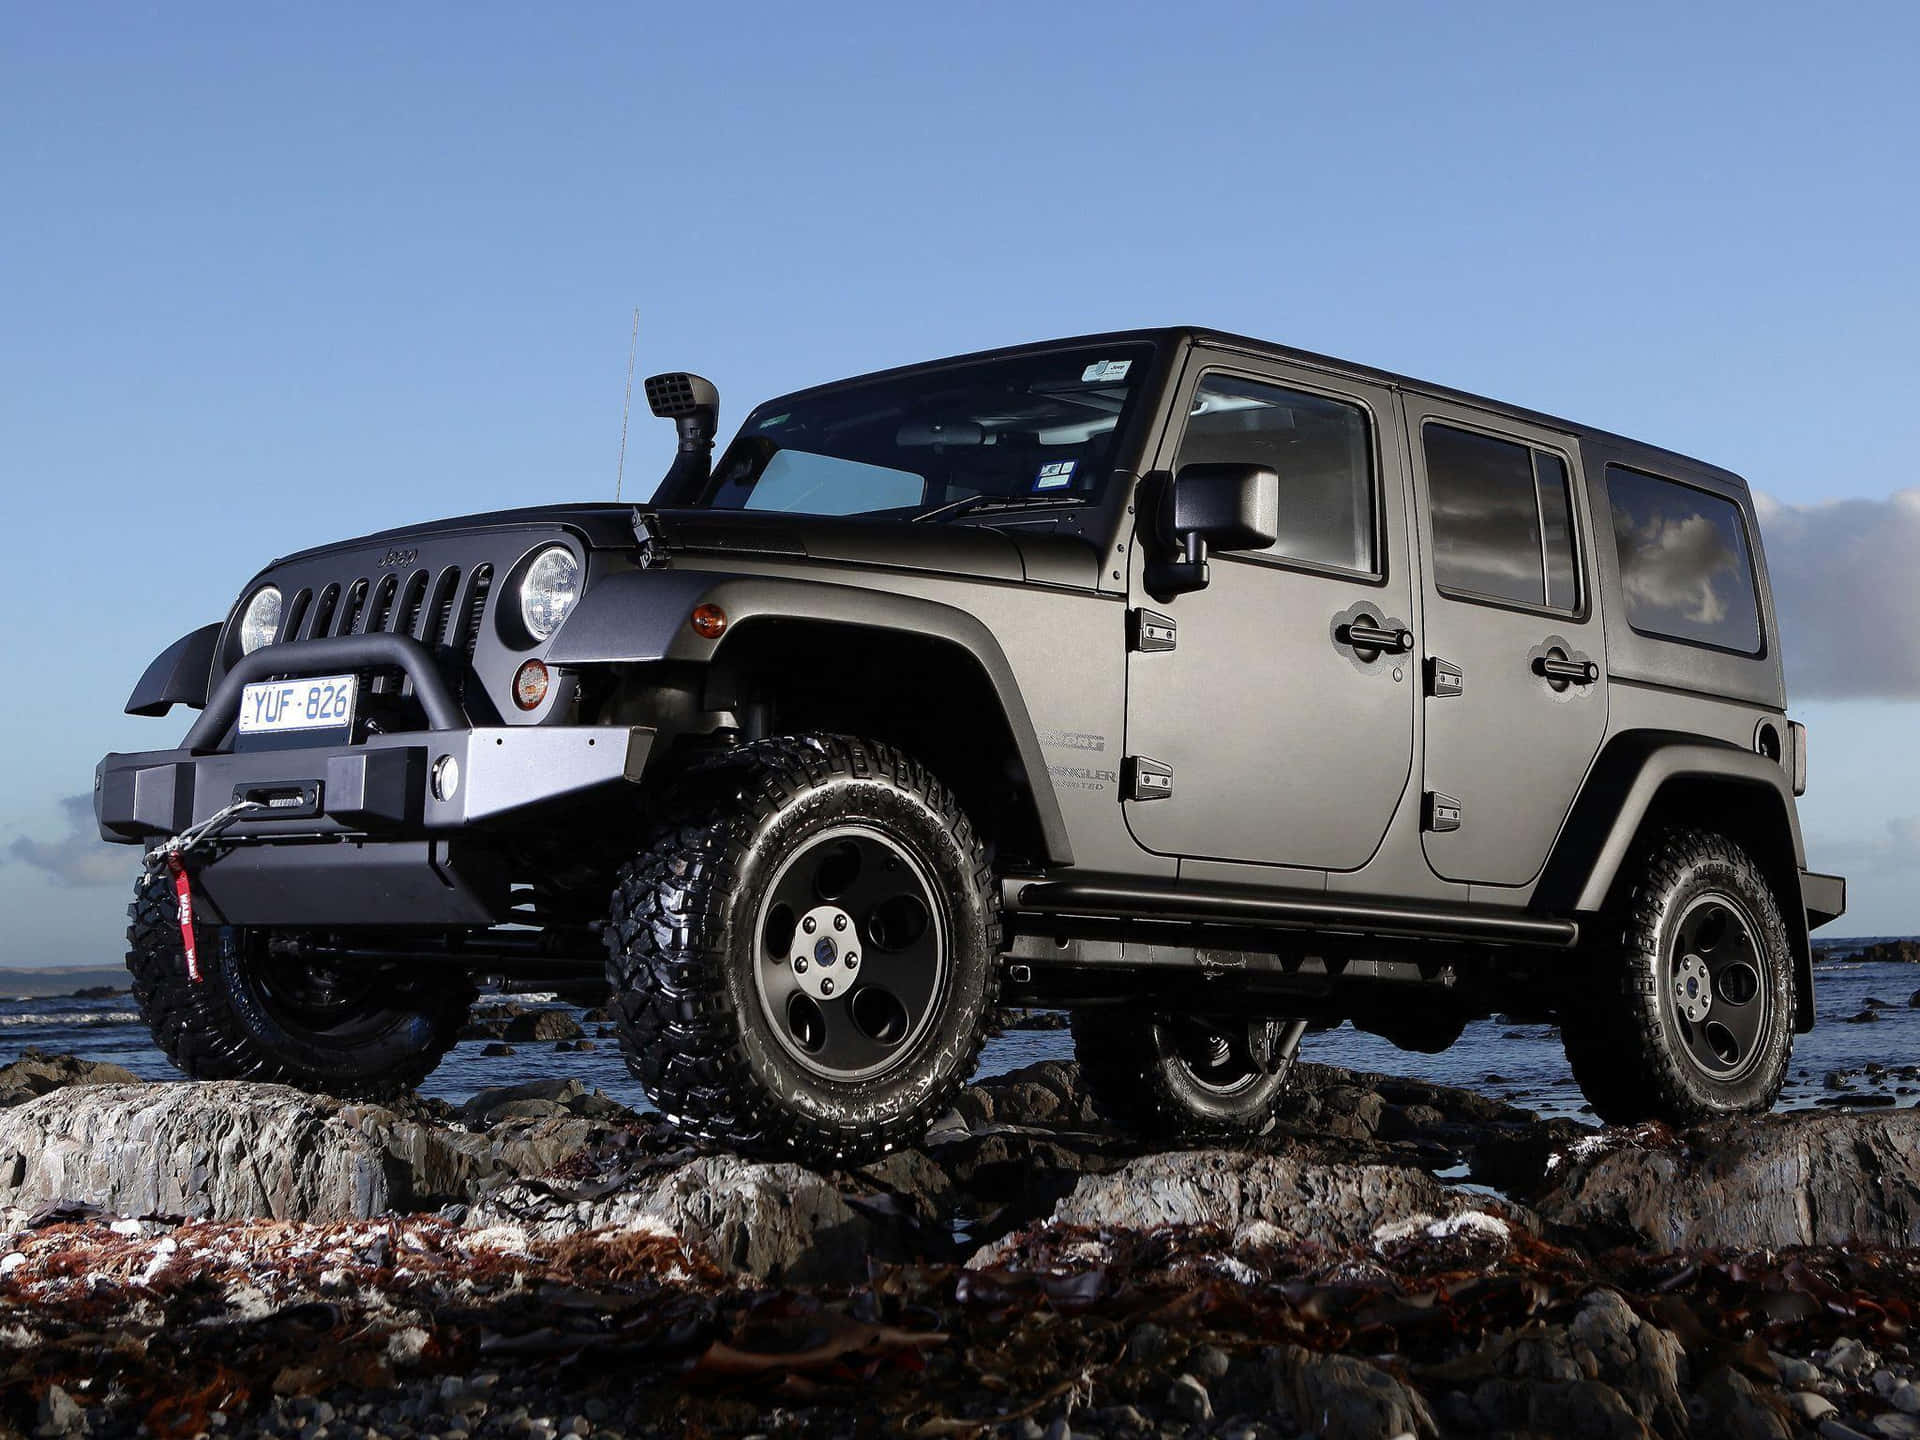 A Black Jeep Is Parked On Rocks Near The Ocean